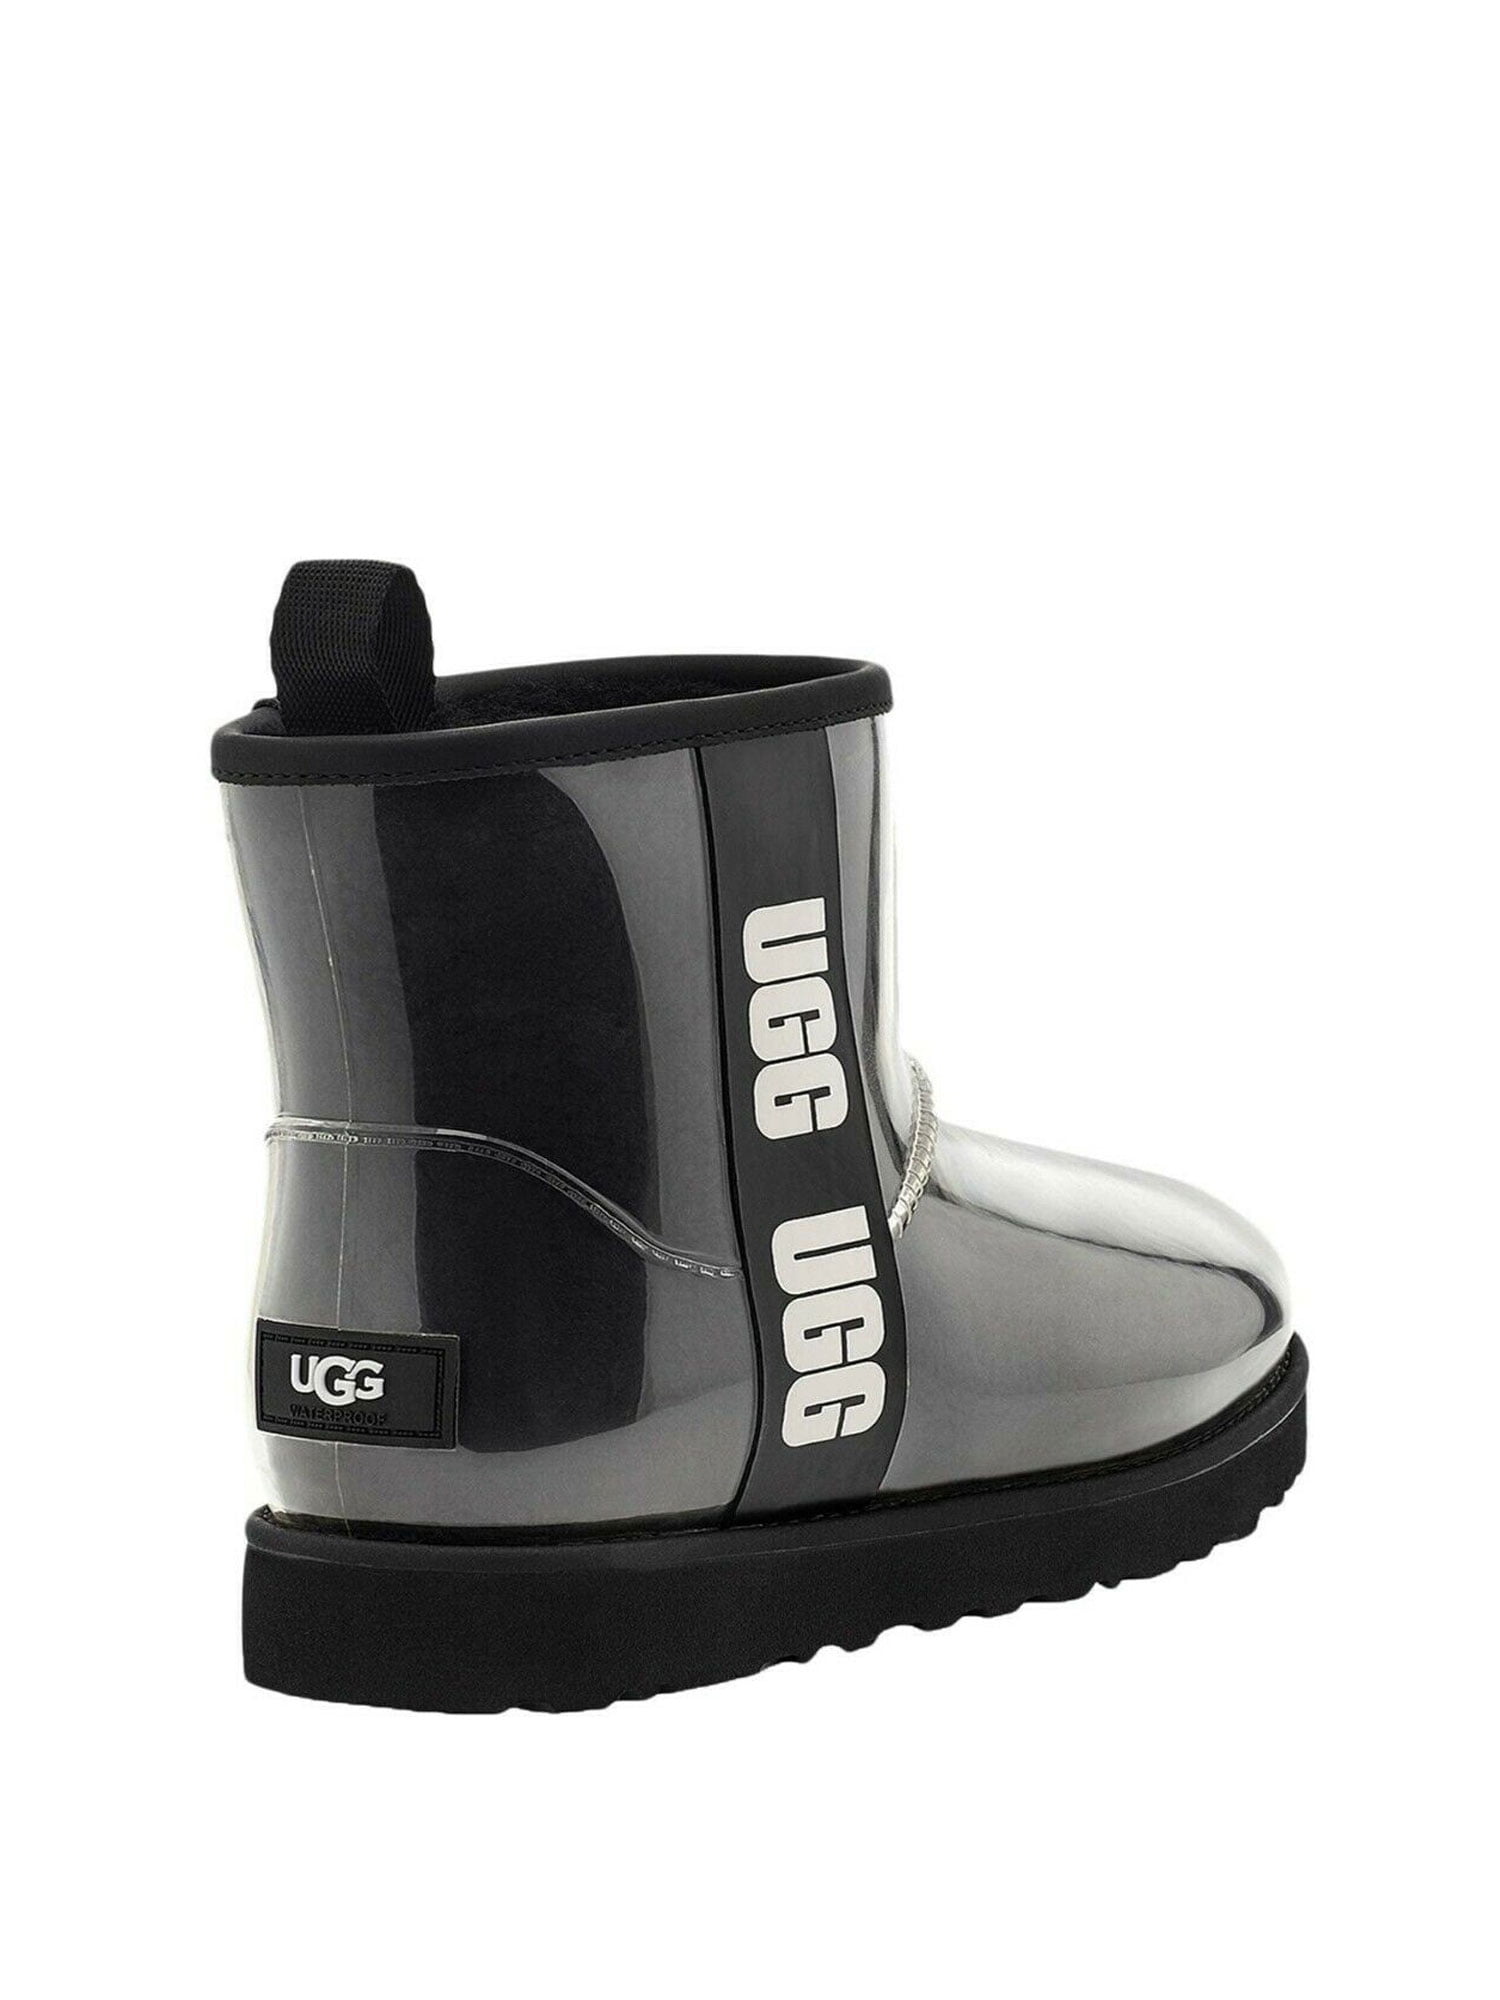 ugg ankle boots waterproof